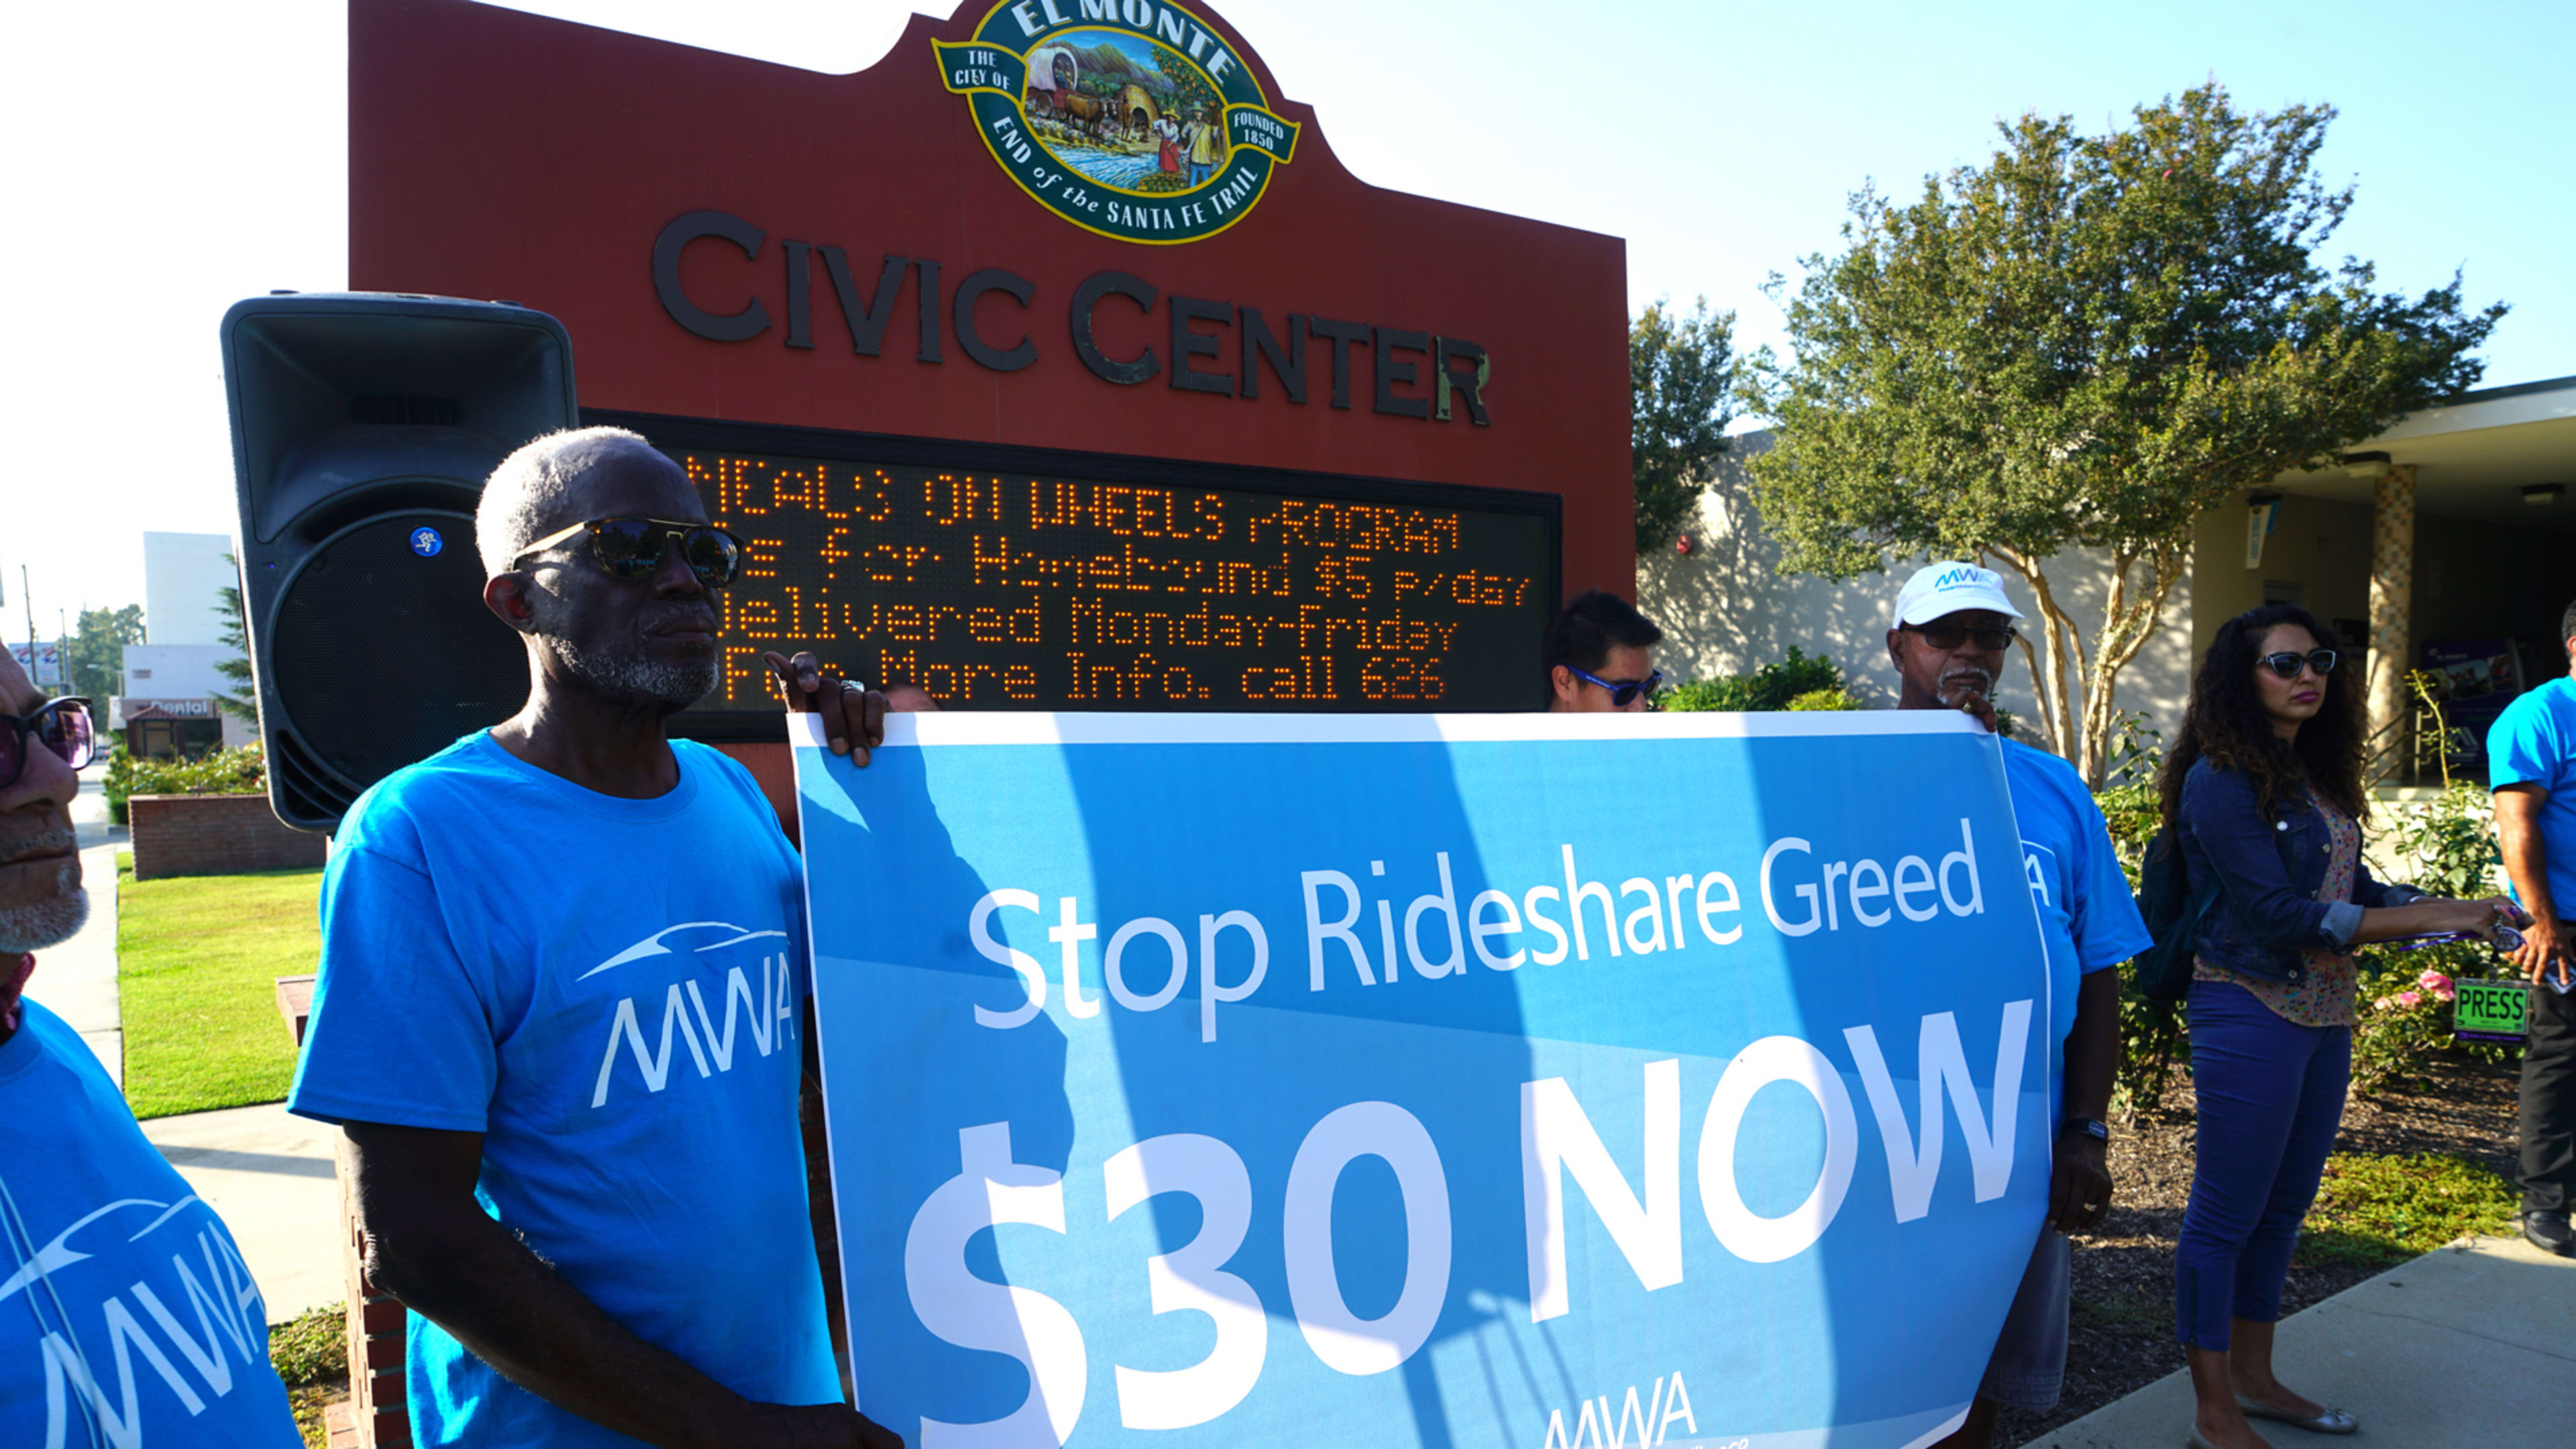 This California city just voted to give a $30 minimum wage to Uber and Lyft drivers